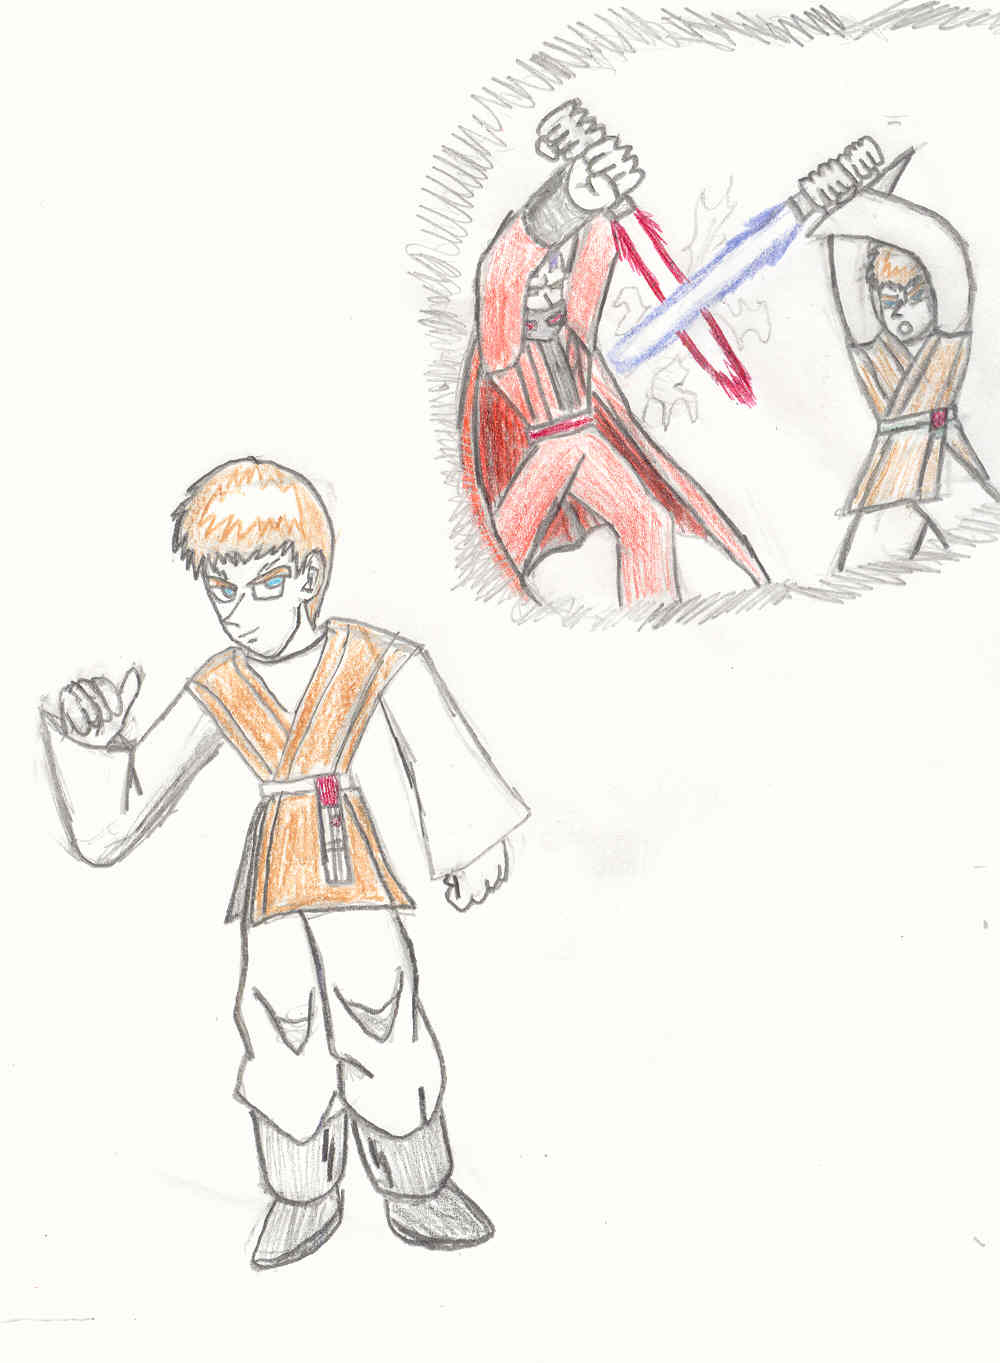 Life of the Jedi Revan by MageKnight007